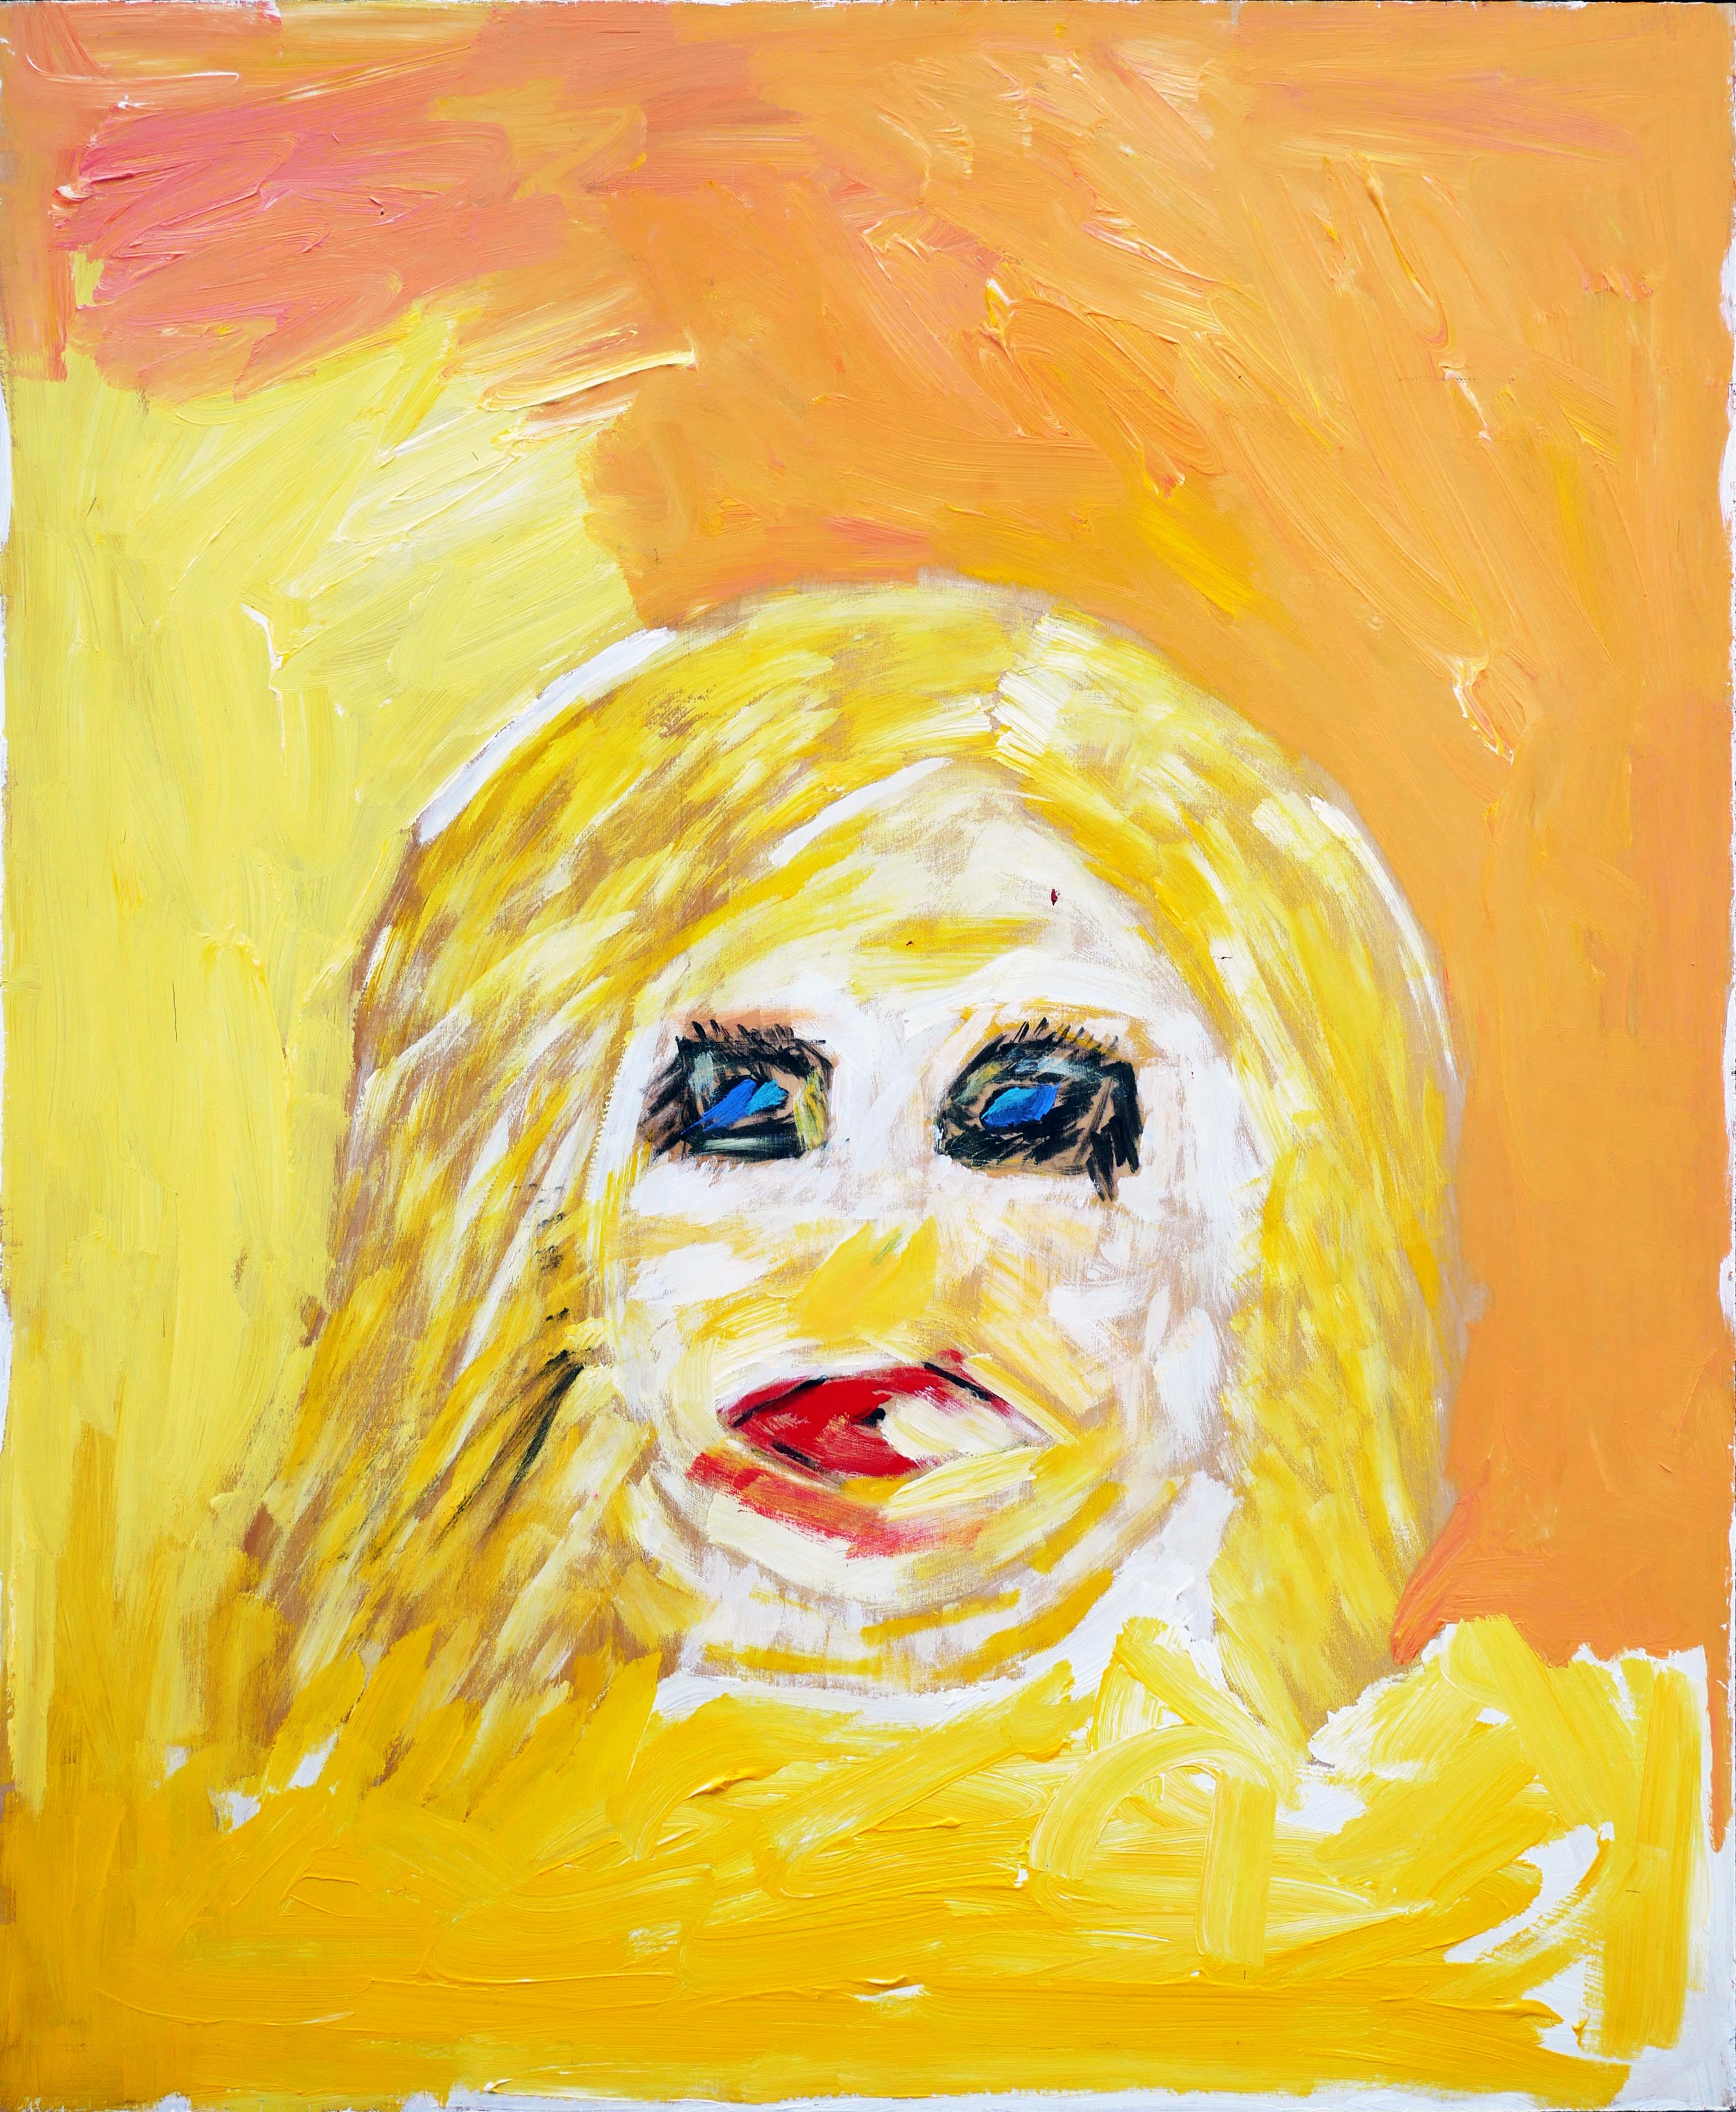 Paul Reeves Figurative Painting - Orange and Yellow-Toned Abstract Figurative Portrait of a Blonde Woman